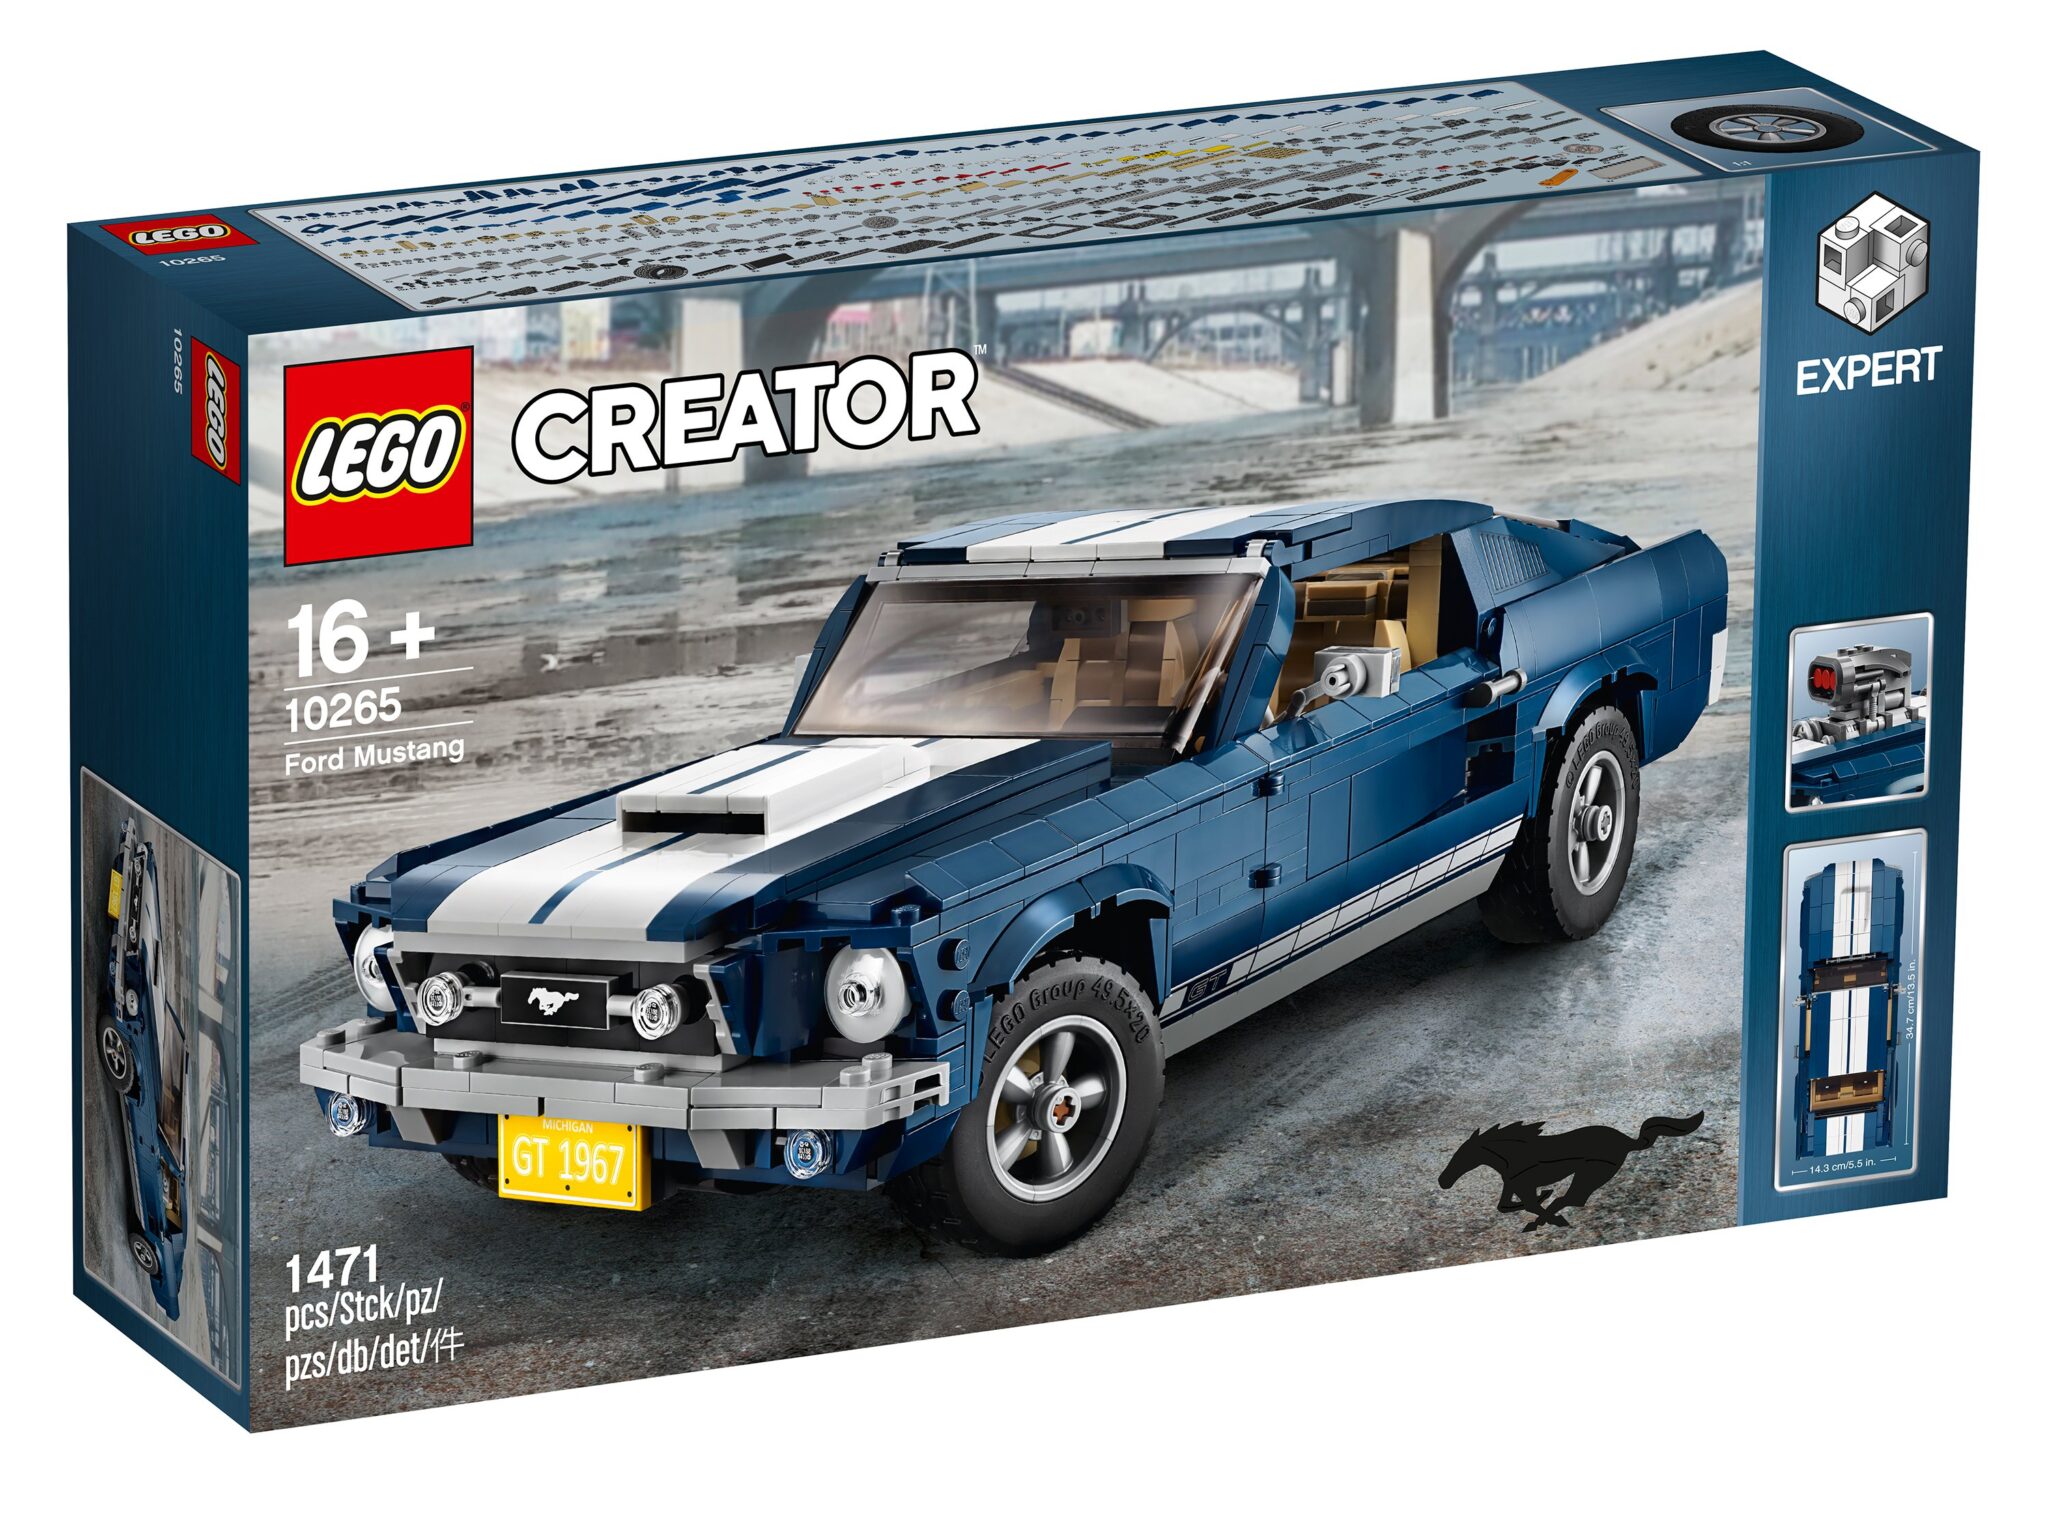 10265 Lego Creator - Ford Mustang